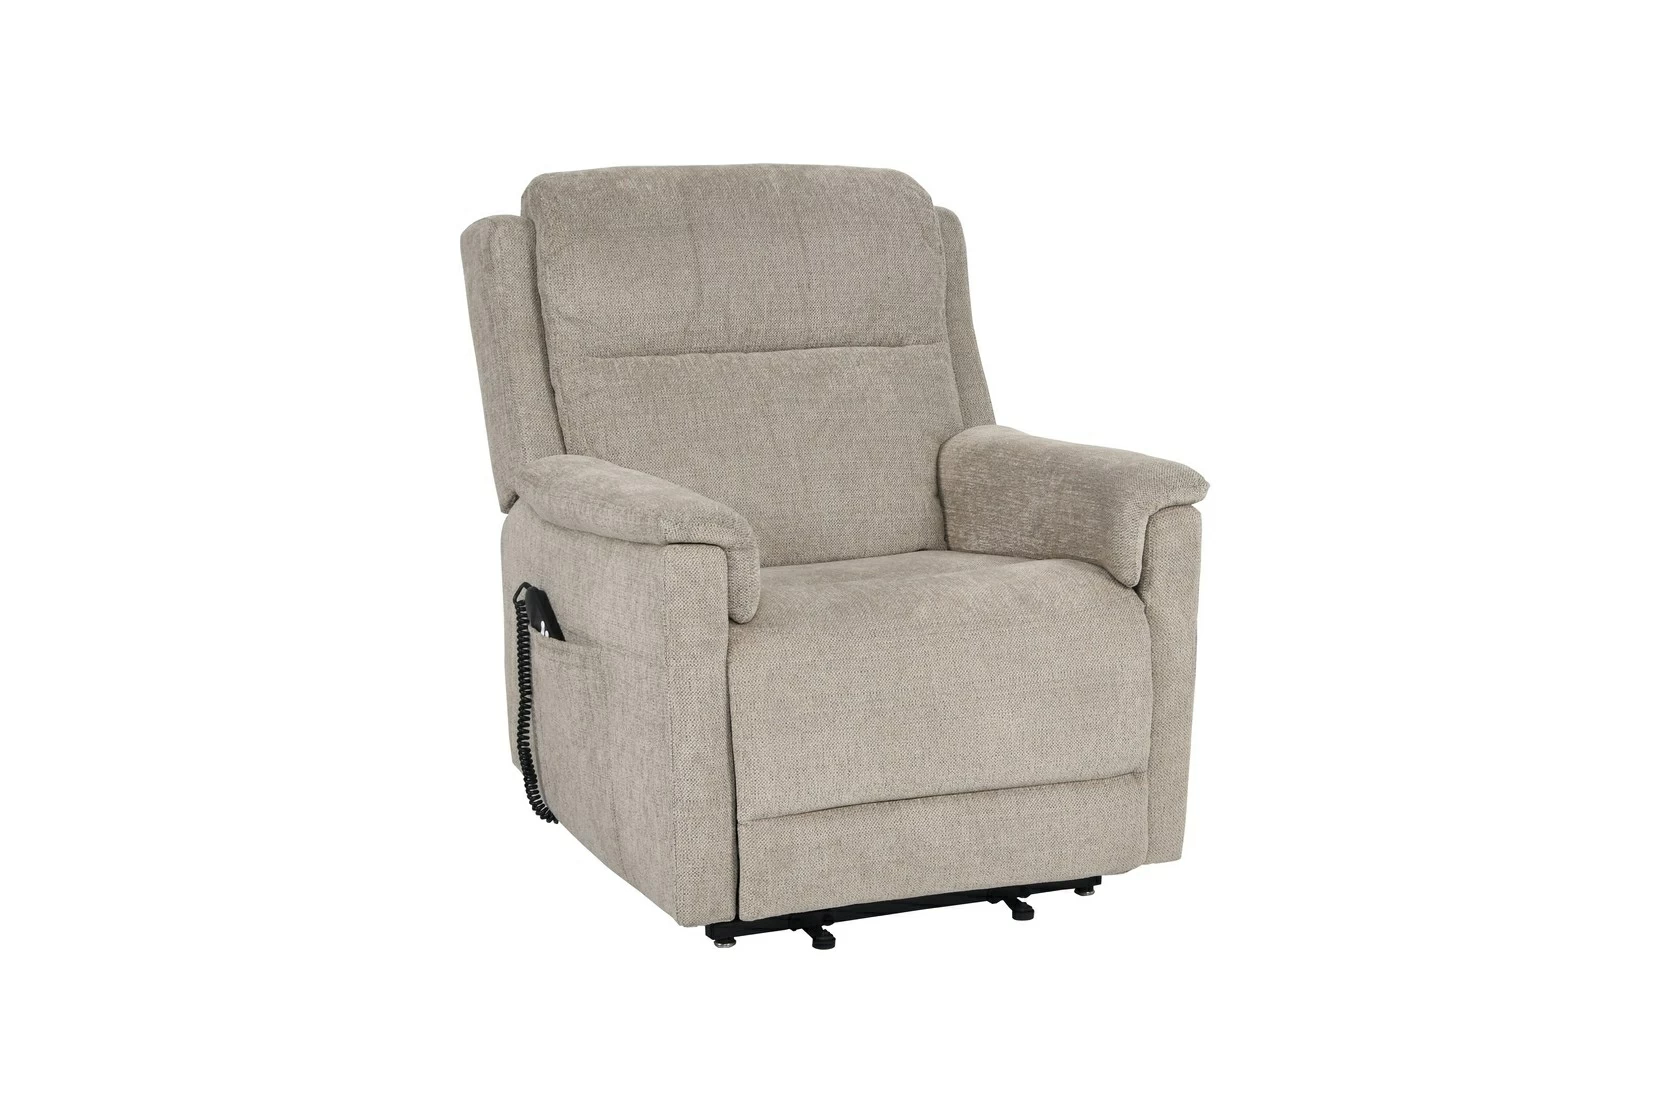 GFA - Ilminster - Biscuit - Fabric - Dual Motor - Lift and Riser Recliner  Chair